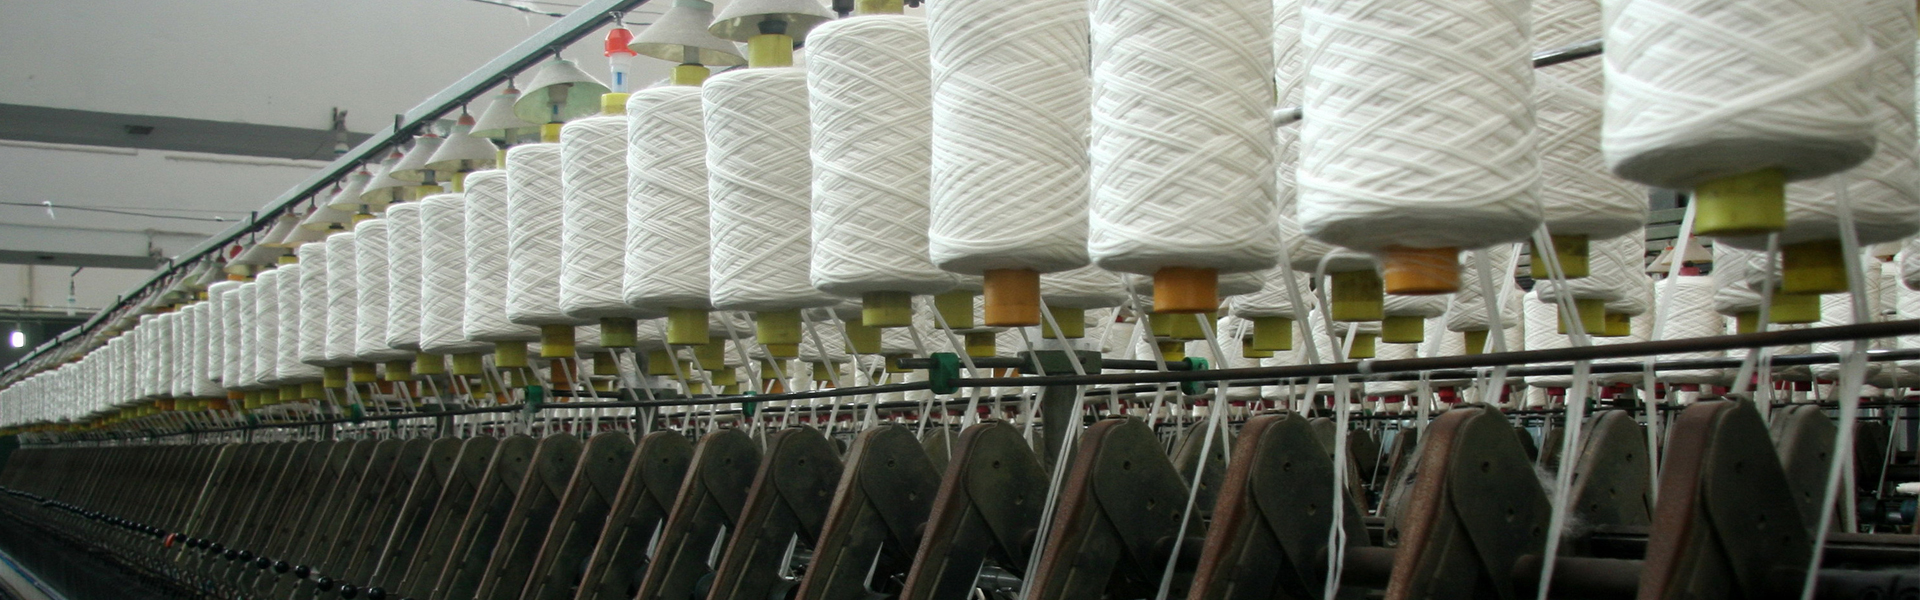 Sweater factory